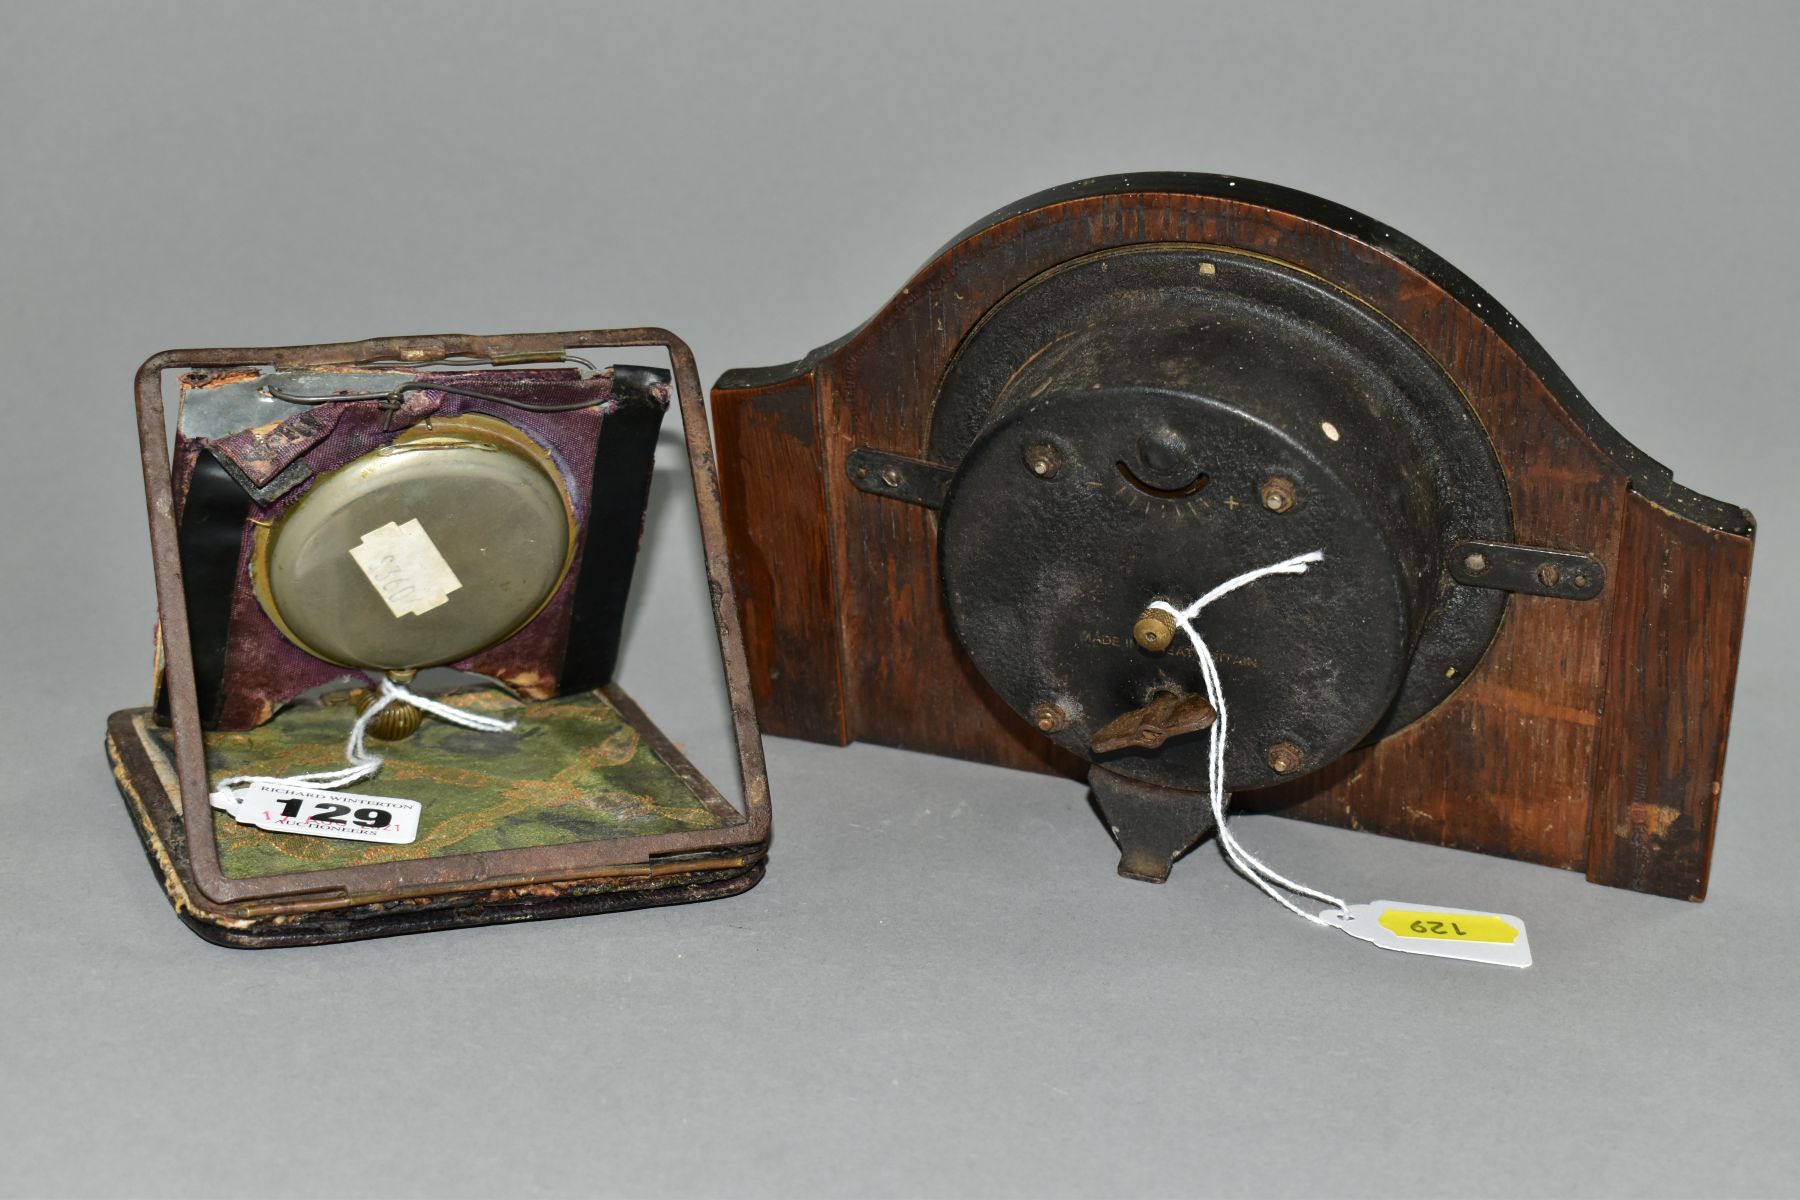 AN EARLY 20TH CENTURY ASPREY 8 DAY TRAVEL CLOCK, in a damaged leather folding case, incomplete, - Image 4 of 5